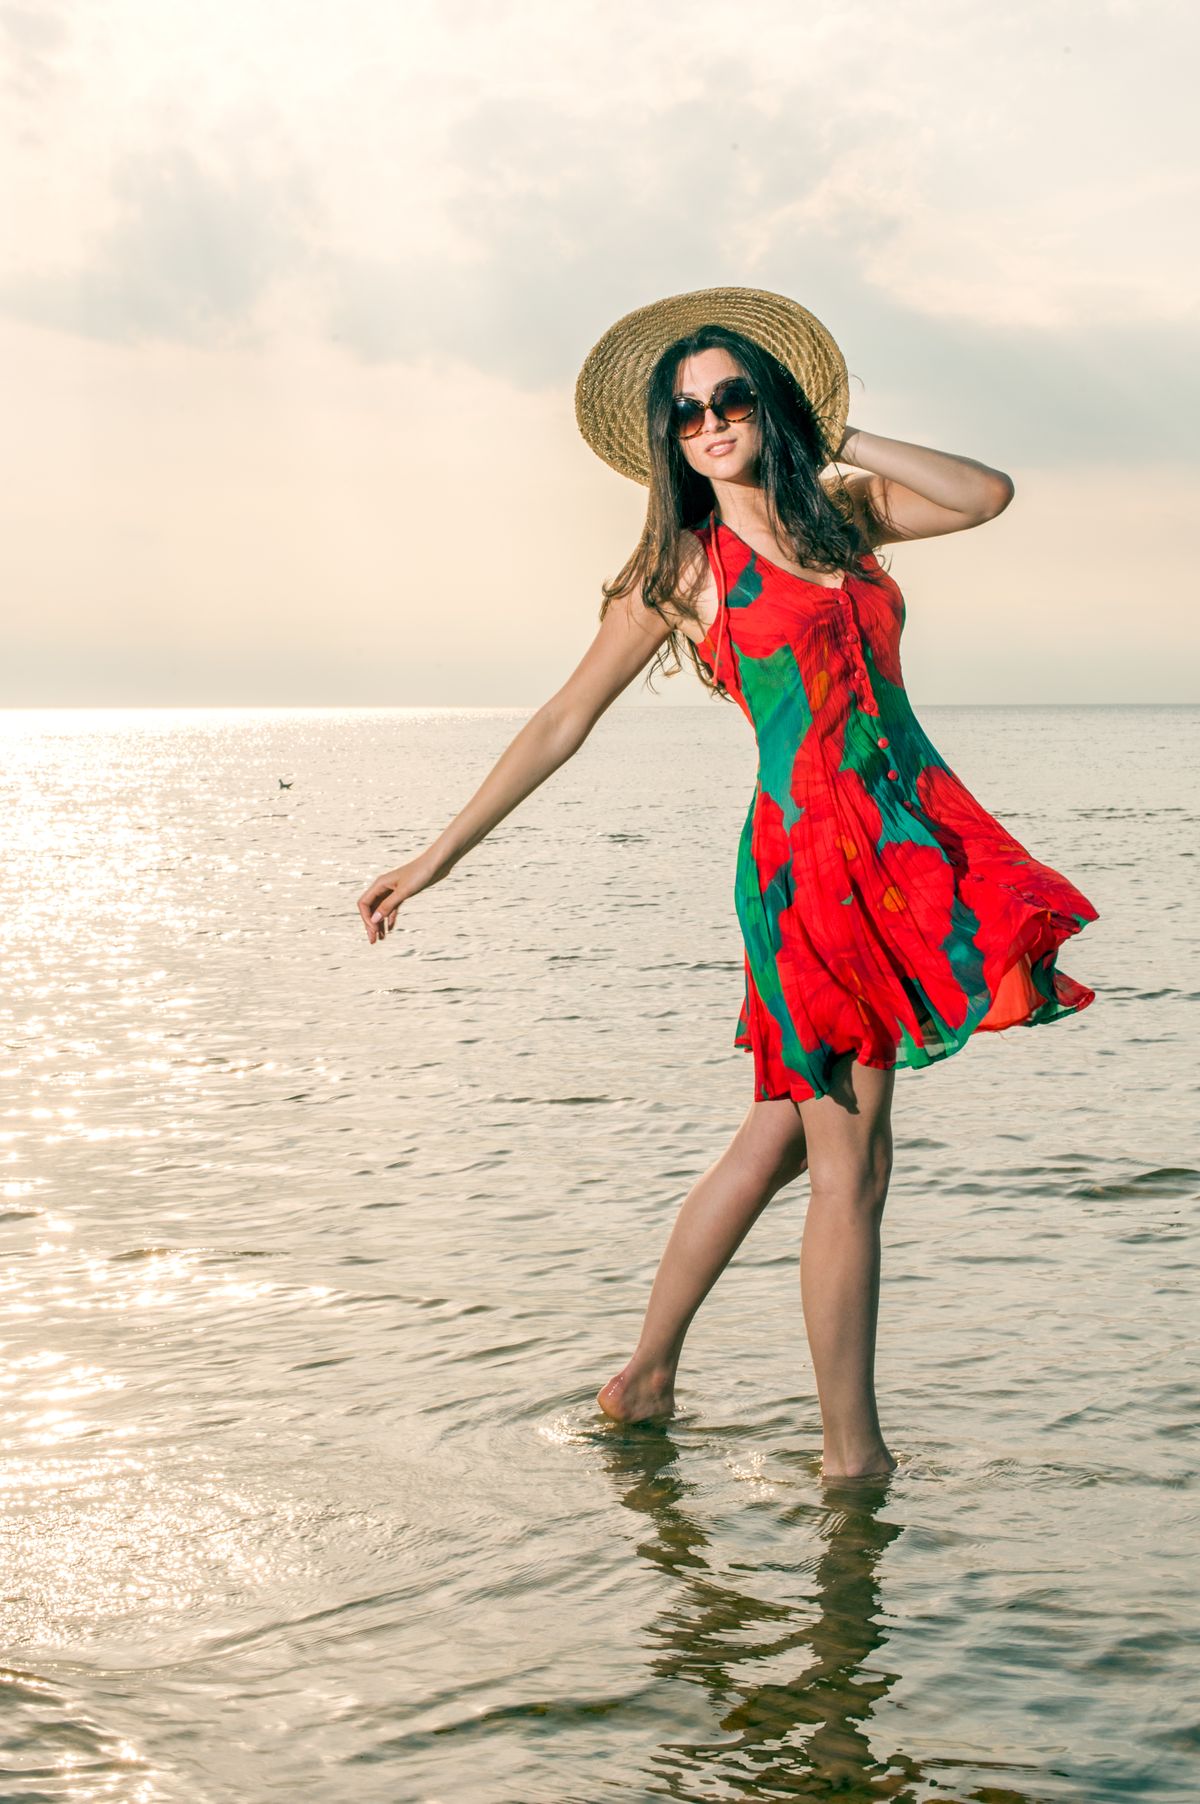 Girl,In,A,Summer,Dress,And,Straw,Hat,Dancing,On